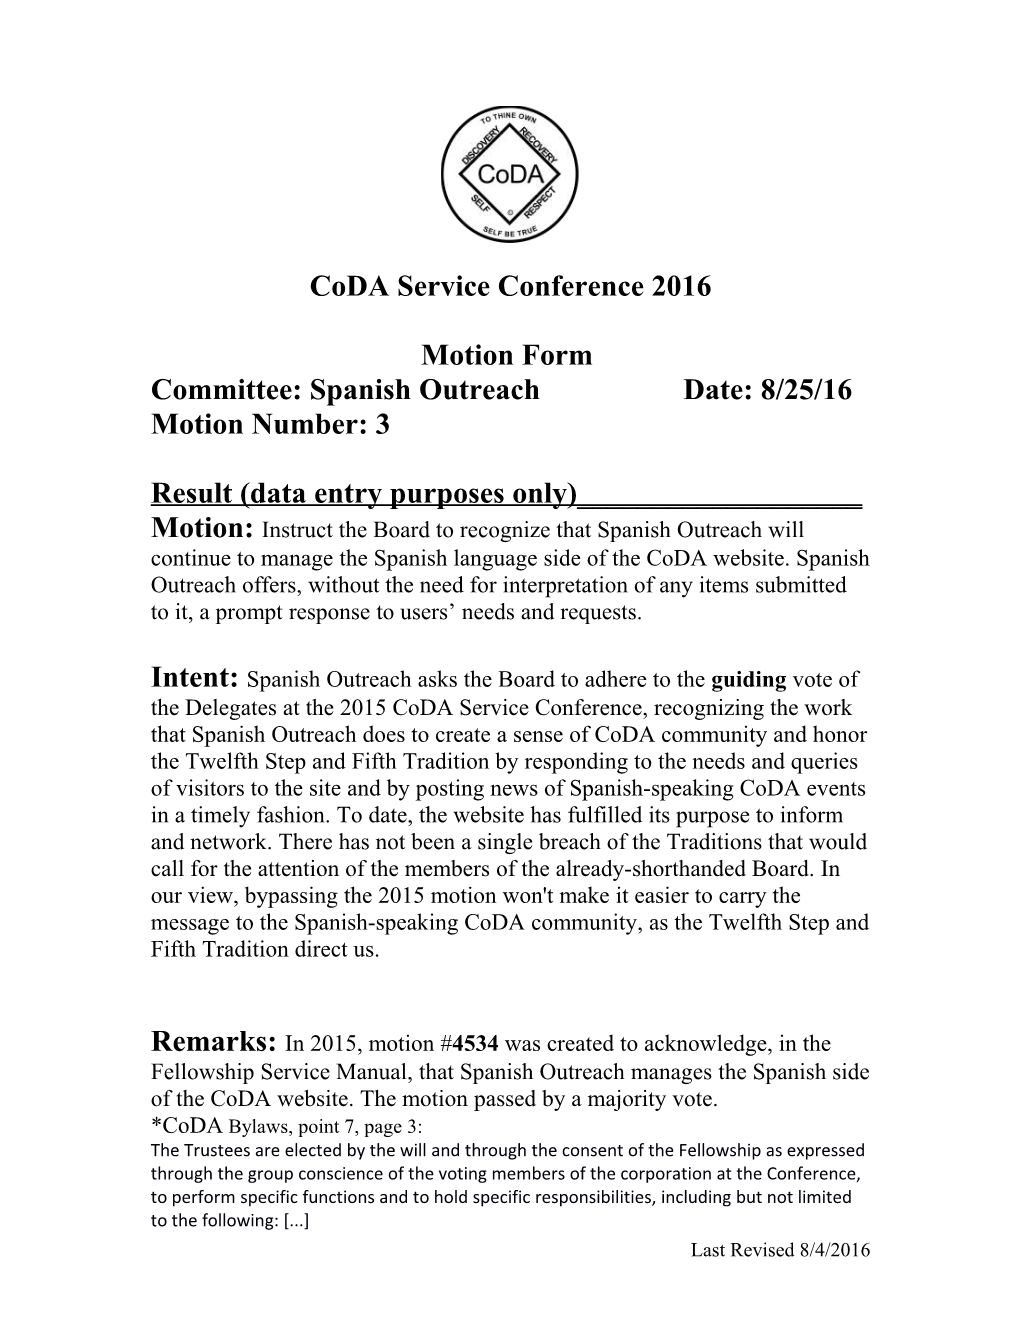 Committee: Spanish Outreach Date: 8/25/16